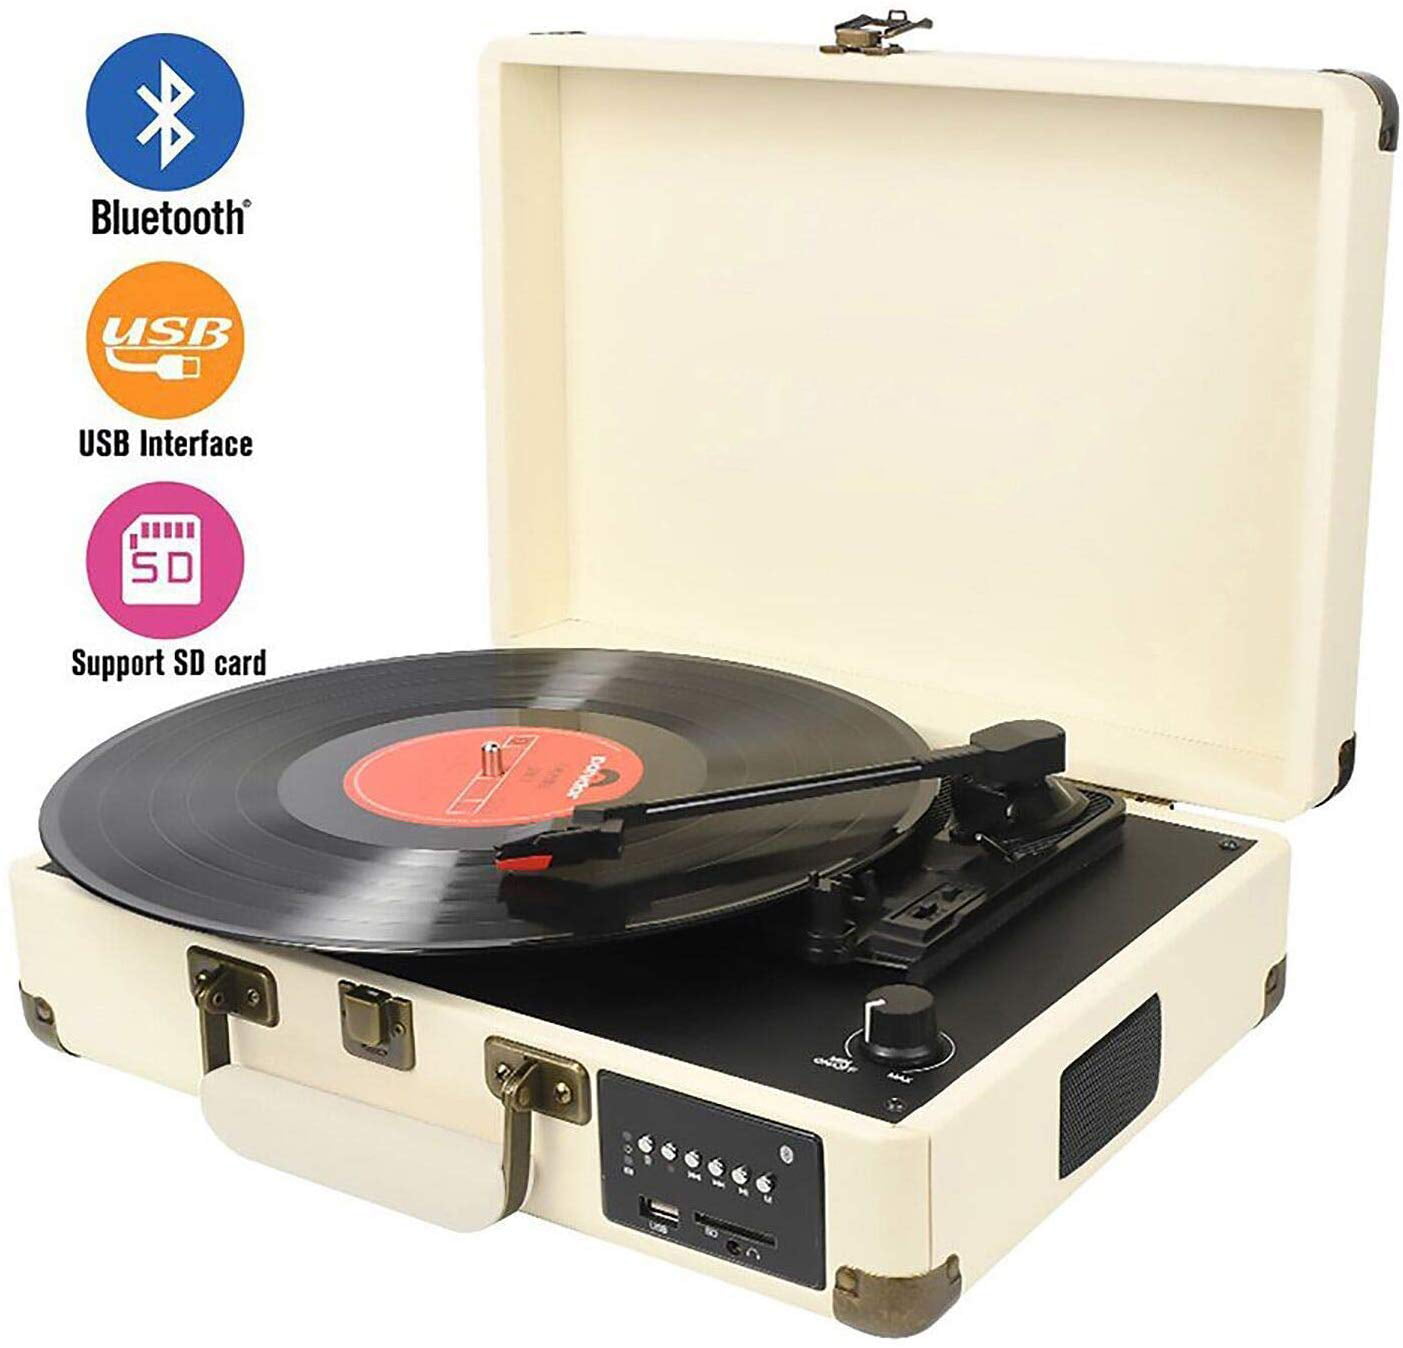 Sylvania STT104BT-BLUE Portable USB Bluetooth Encoding Turntable Record Player in Suitcase